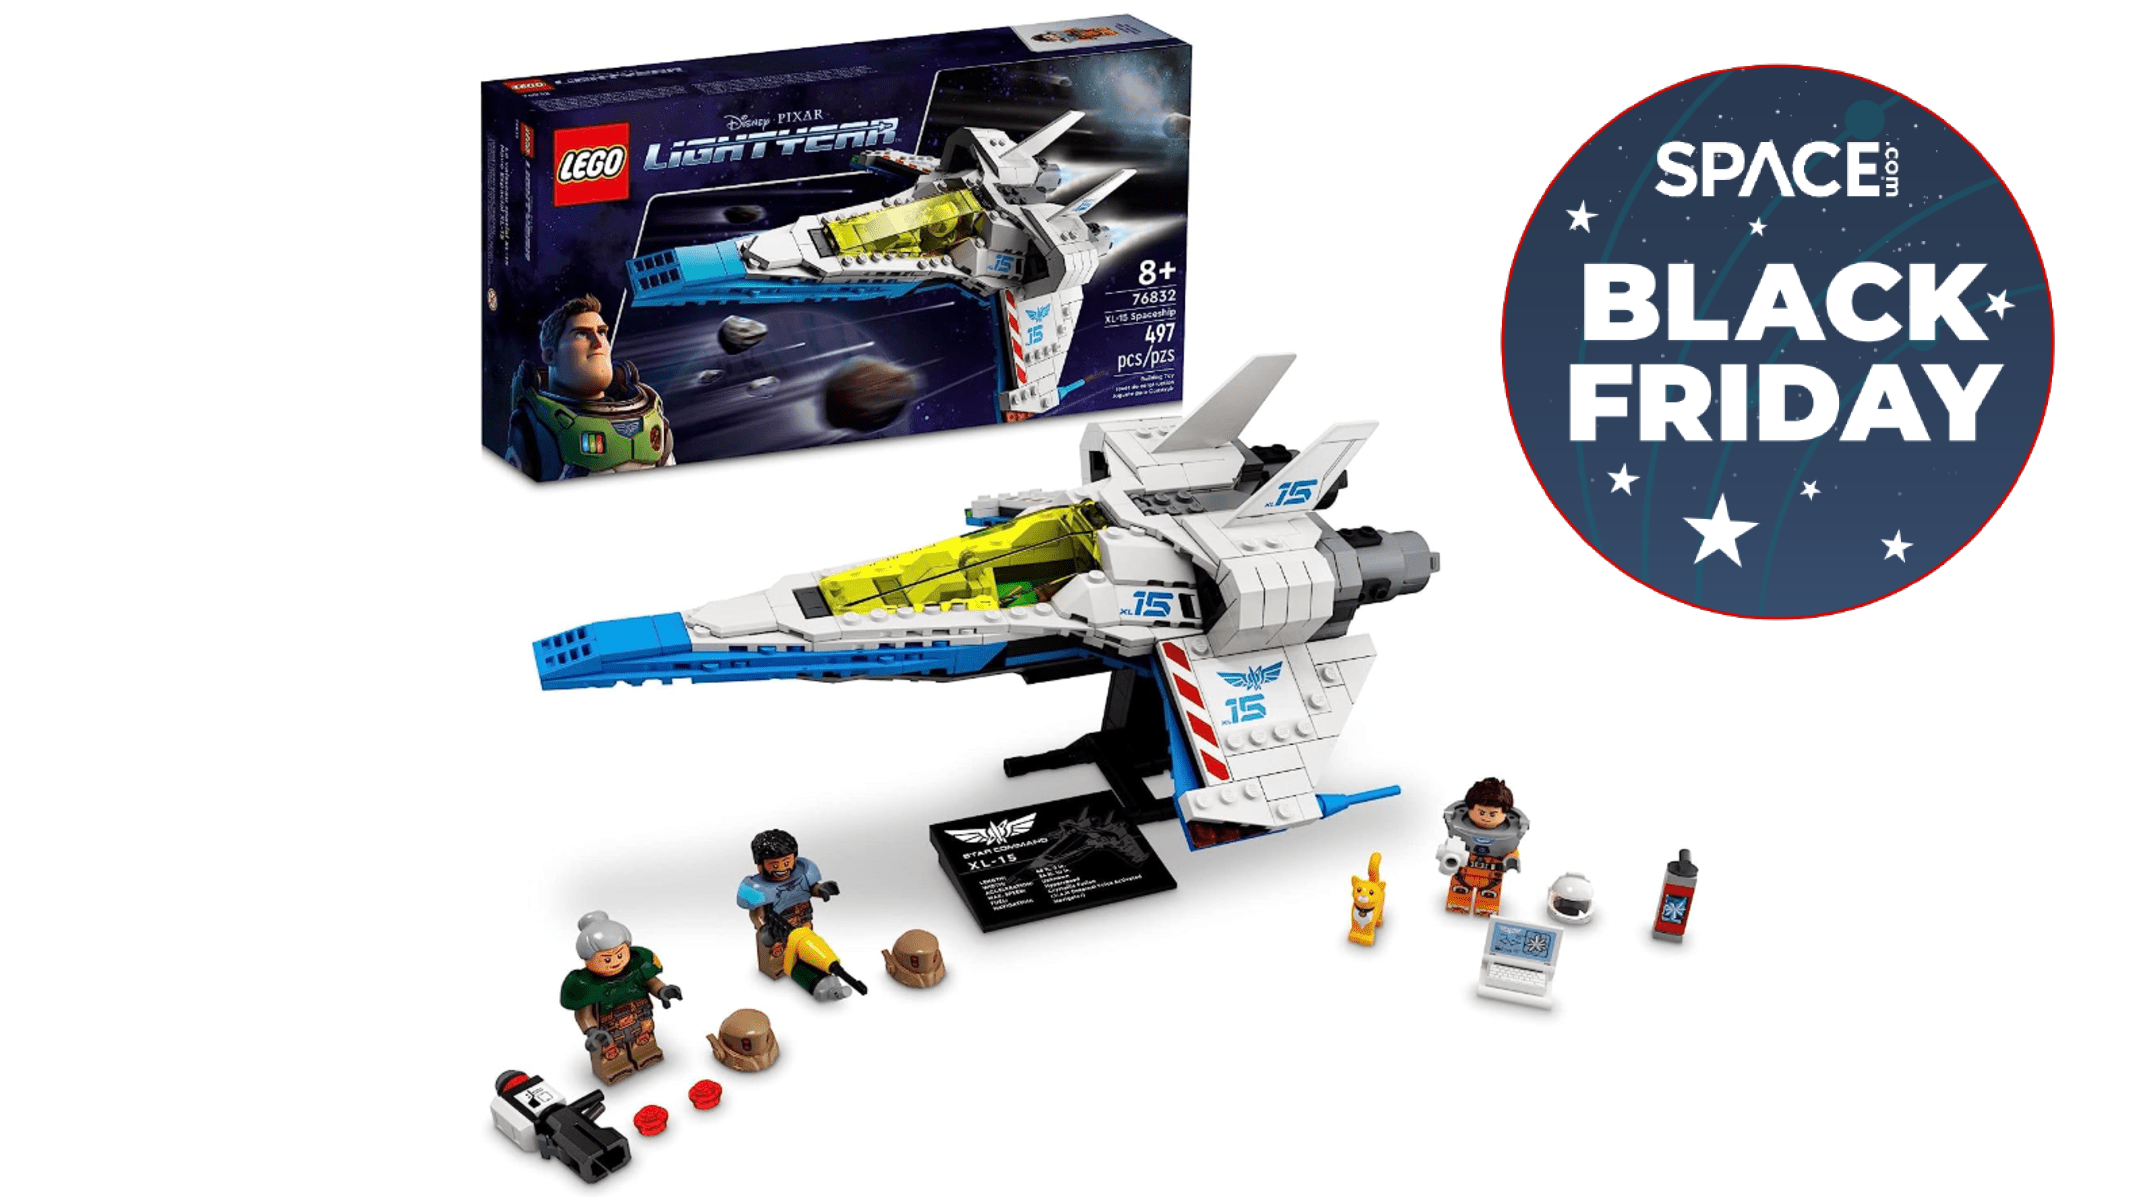 Fly to infinity and beyond to save 40% on Buzz Lightyear’s Lego XL-15 Spaceship for Black Friday Space